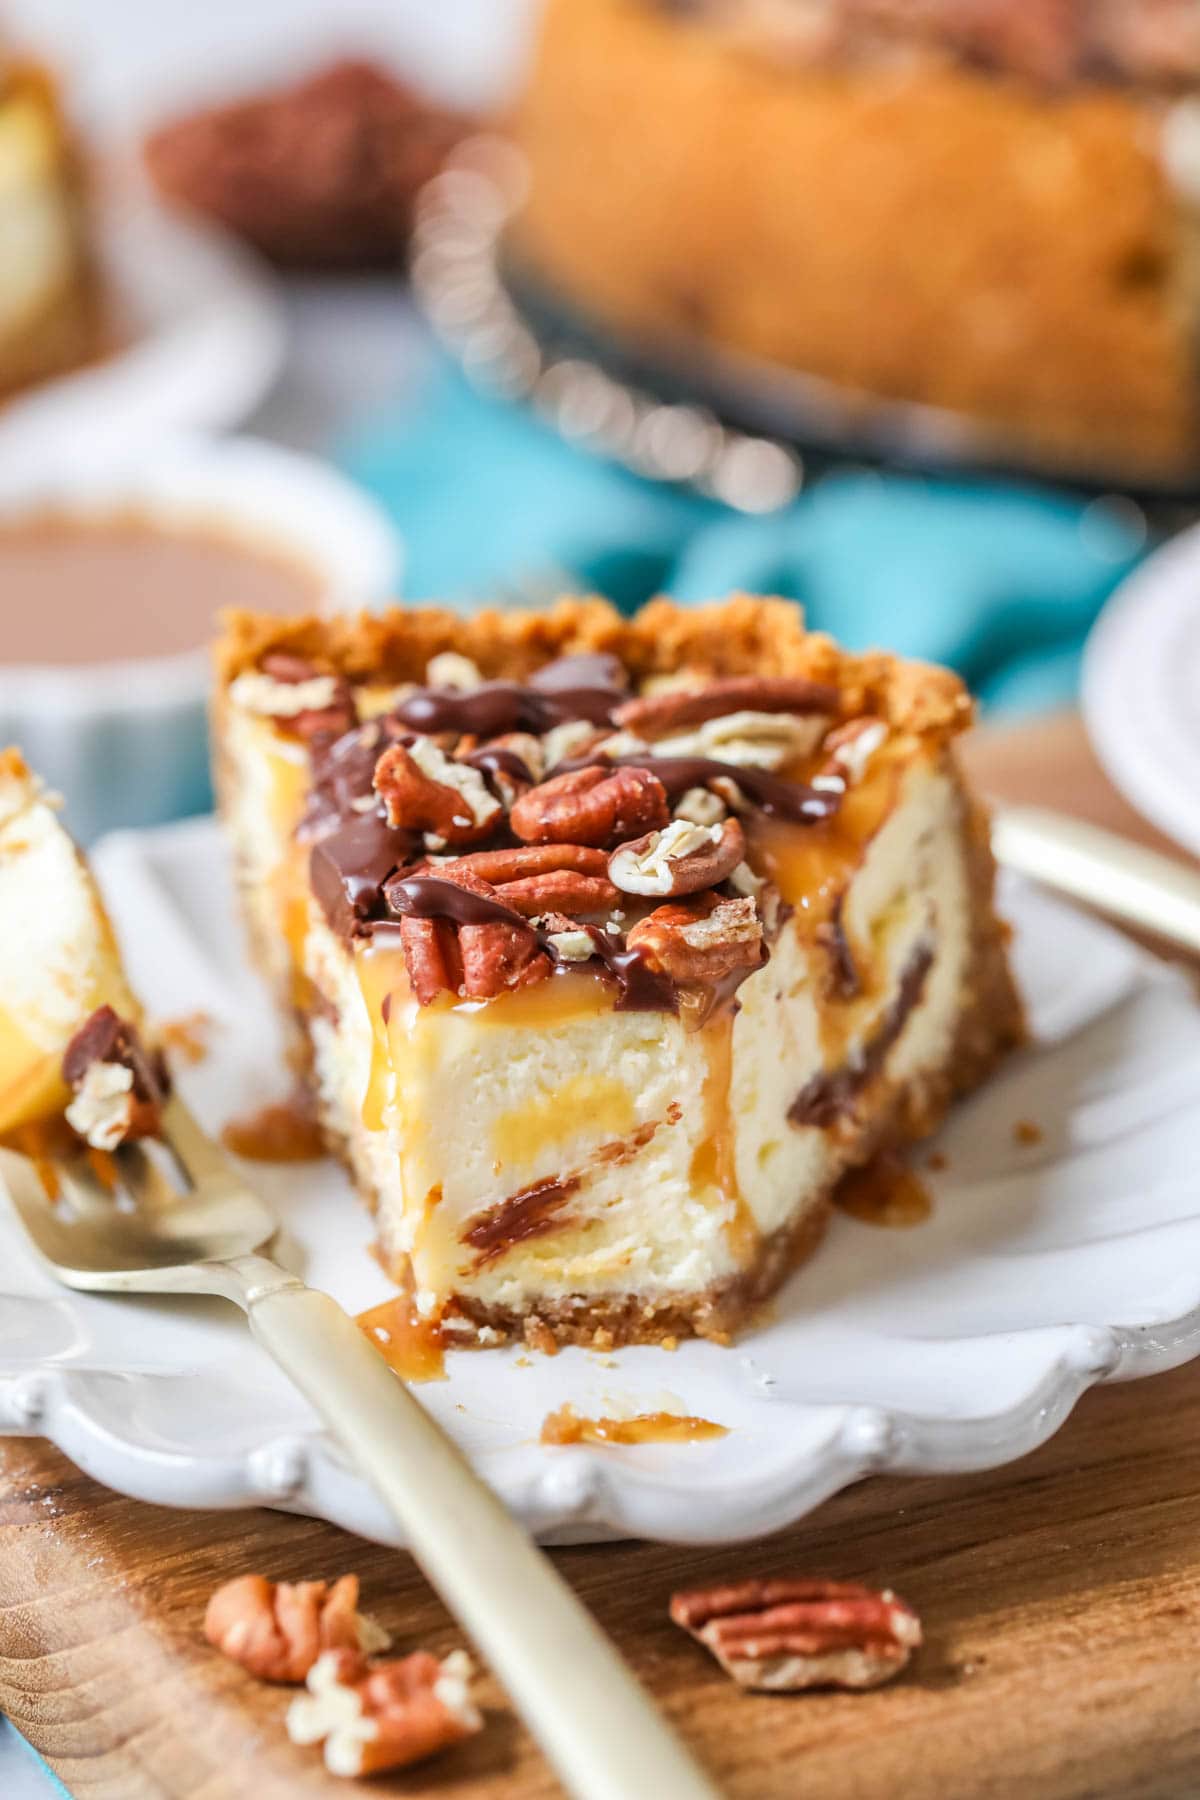 Close-up view of a slice of turtle cheesecake on a plate with one bite missing.